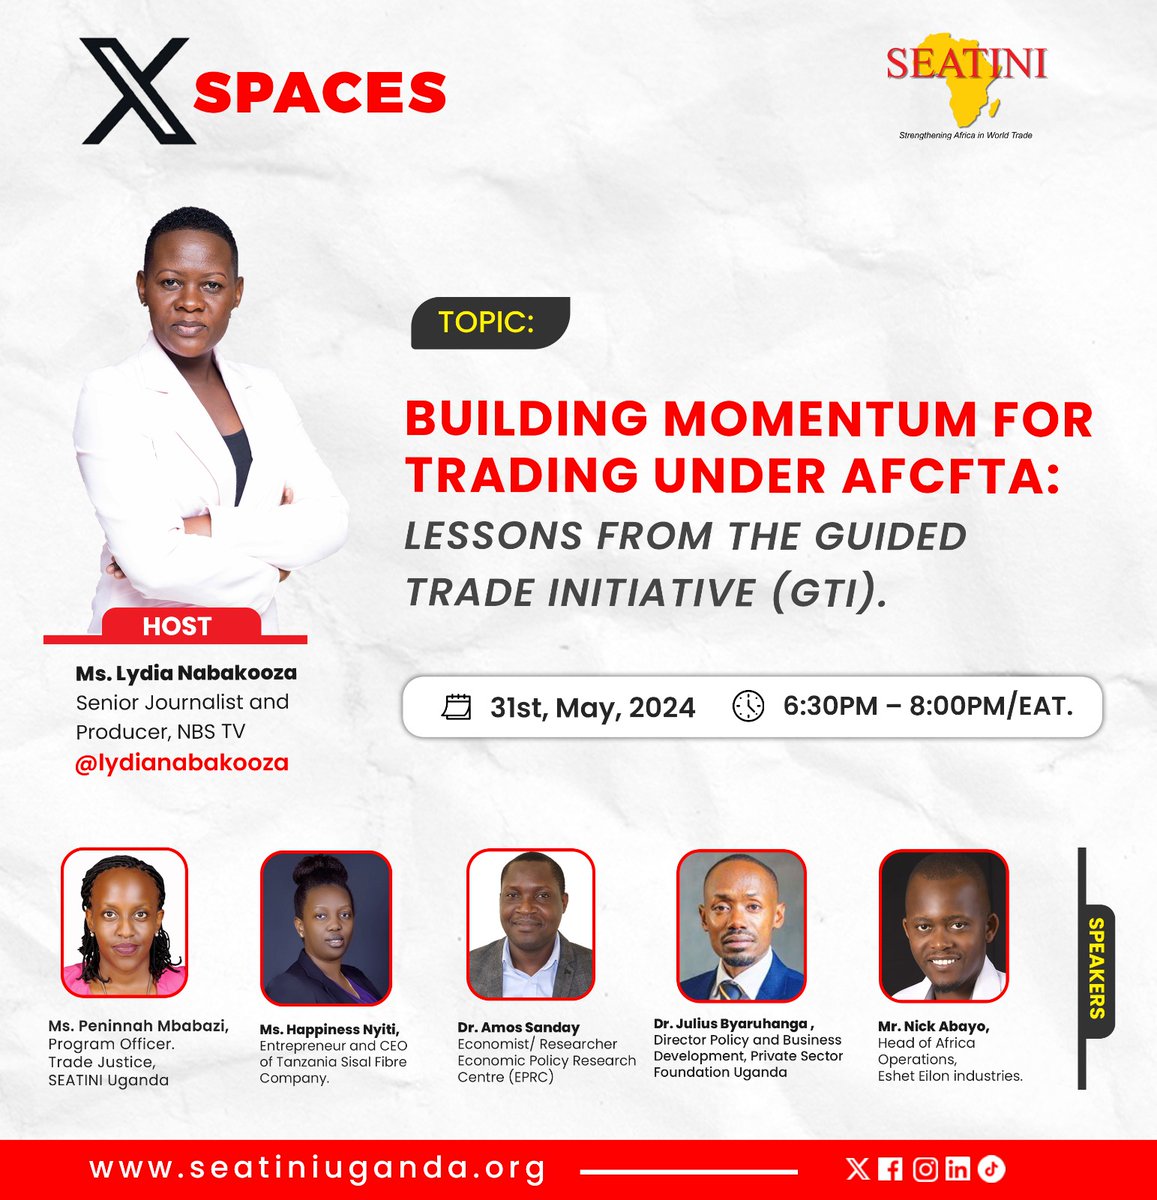 🚀🌍 Exciting SEATINI Uganda is hosting an X Space on BUILDING MOMENTUM FOR TRADING UNDER AFCFTA: LESSONS FROM THE GTI. 📅 31st May🕡 6:30 PM EAT Join key speakers from the private sector, CSOs, and dynamic women- and youth-led SMEs! 🔗bit.ly/3KkTS22 #MakeAFCFTAWork